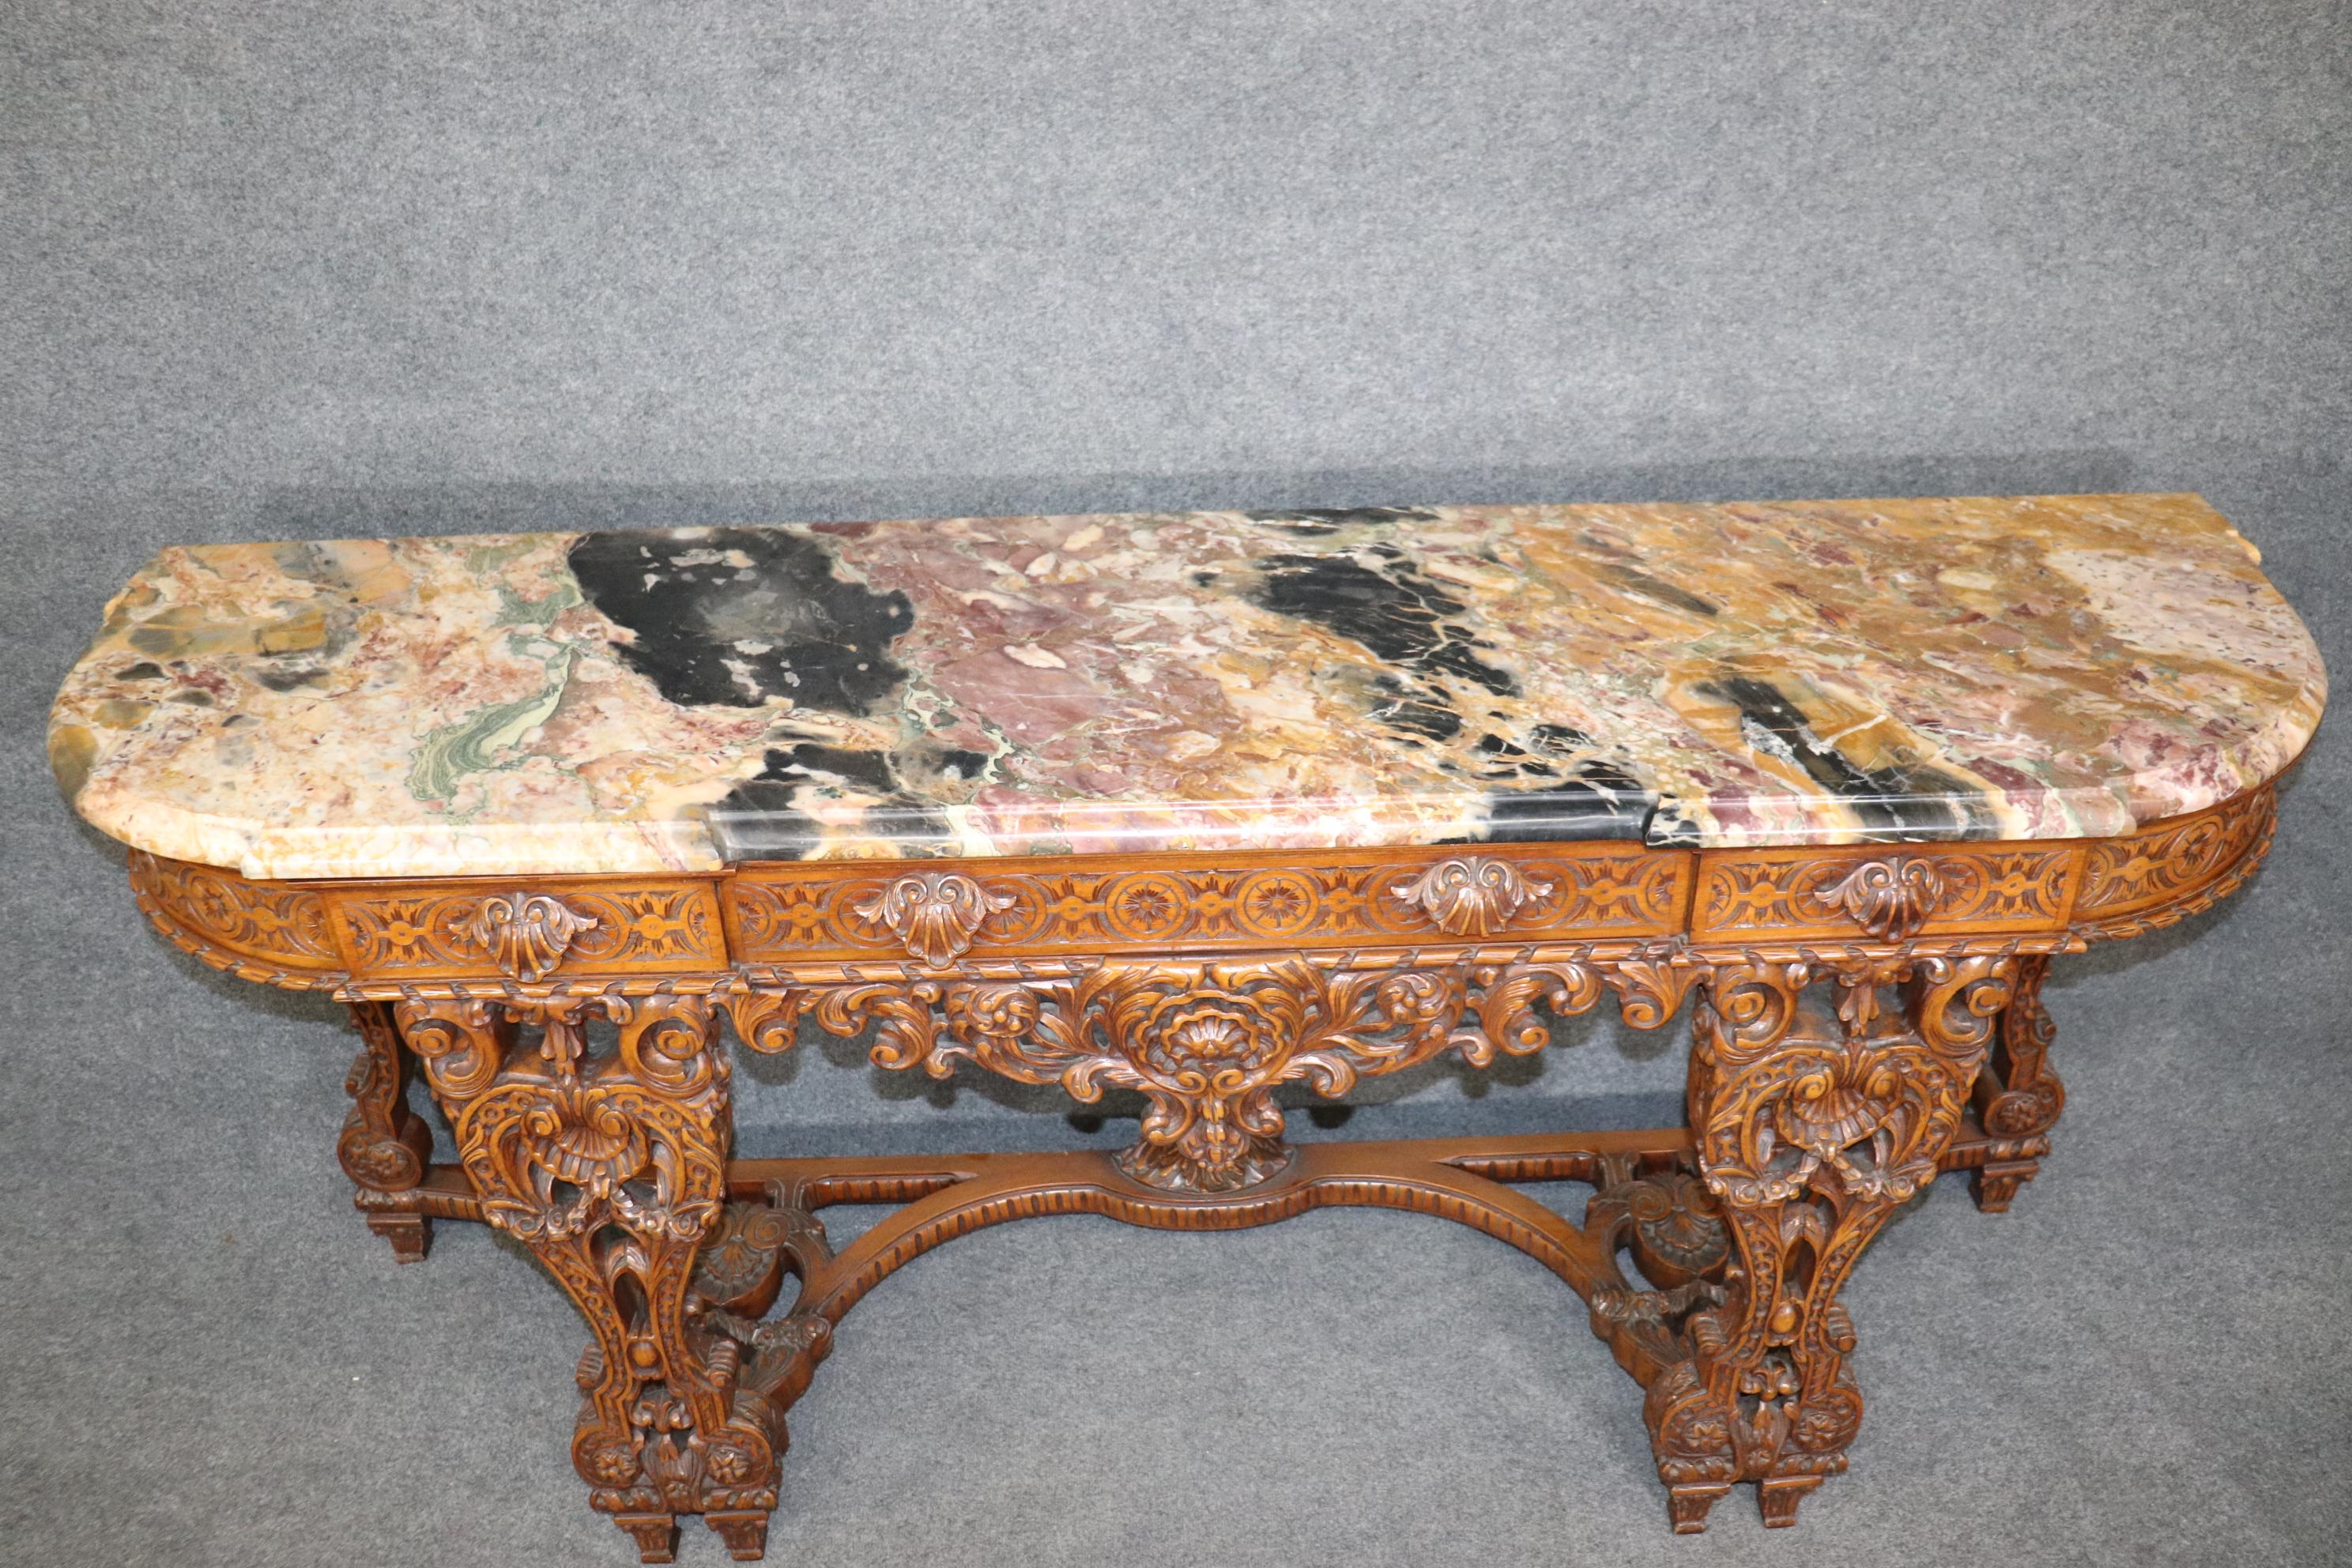 This is a spectacular, and I can't possibly overstate, perhaps one of the most dazzling marble top console tables or sideboard of grand scale online today. The marble is Breccia Vandome, a highy prized harlequin of colors resulting from natural